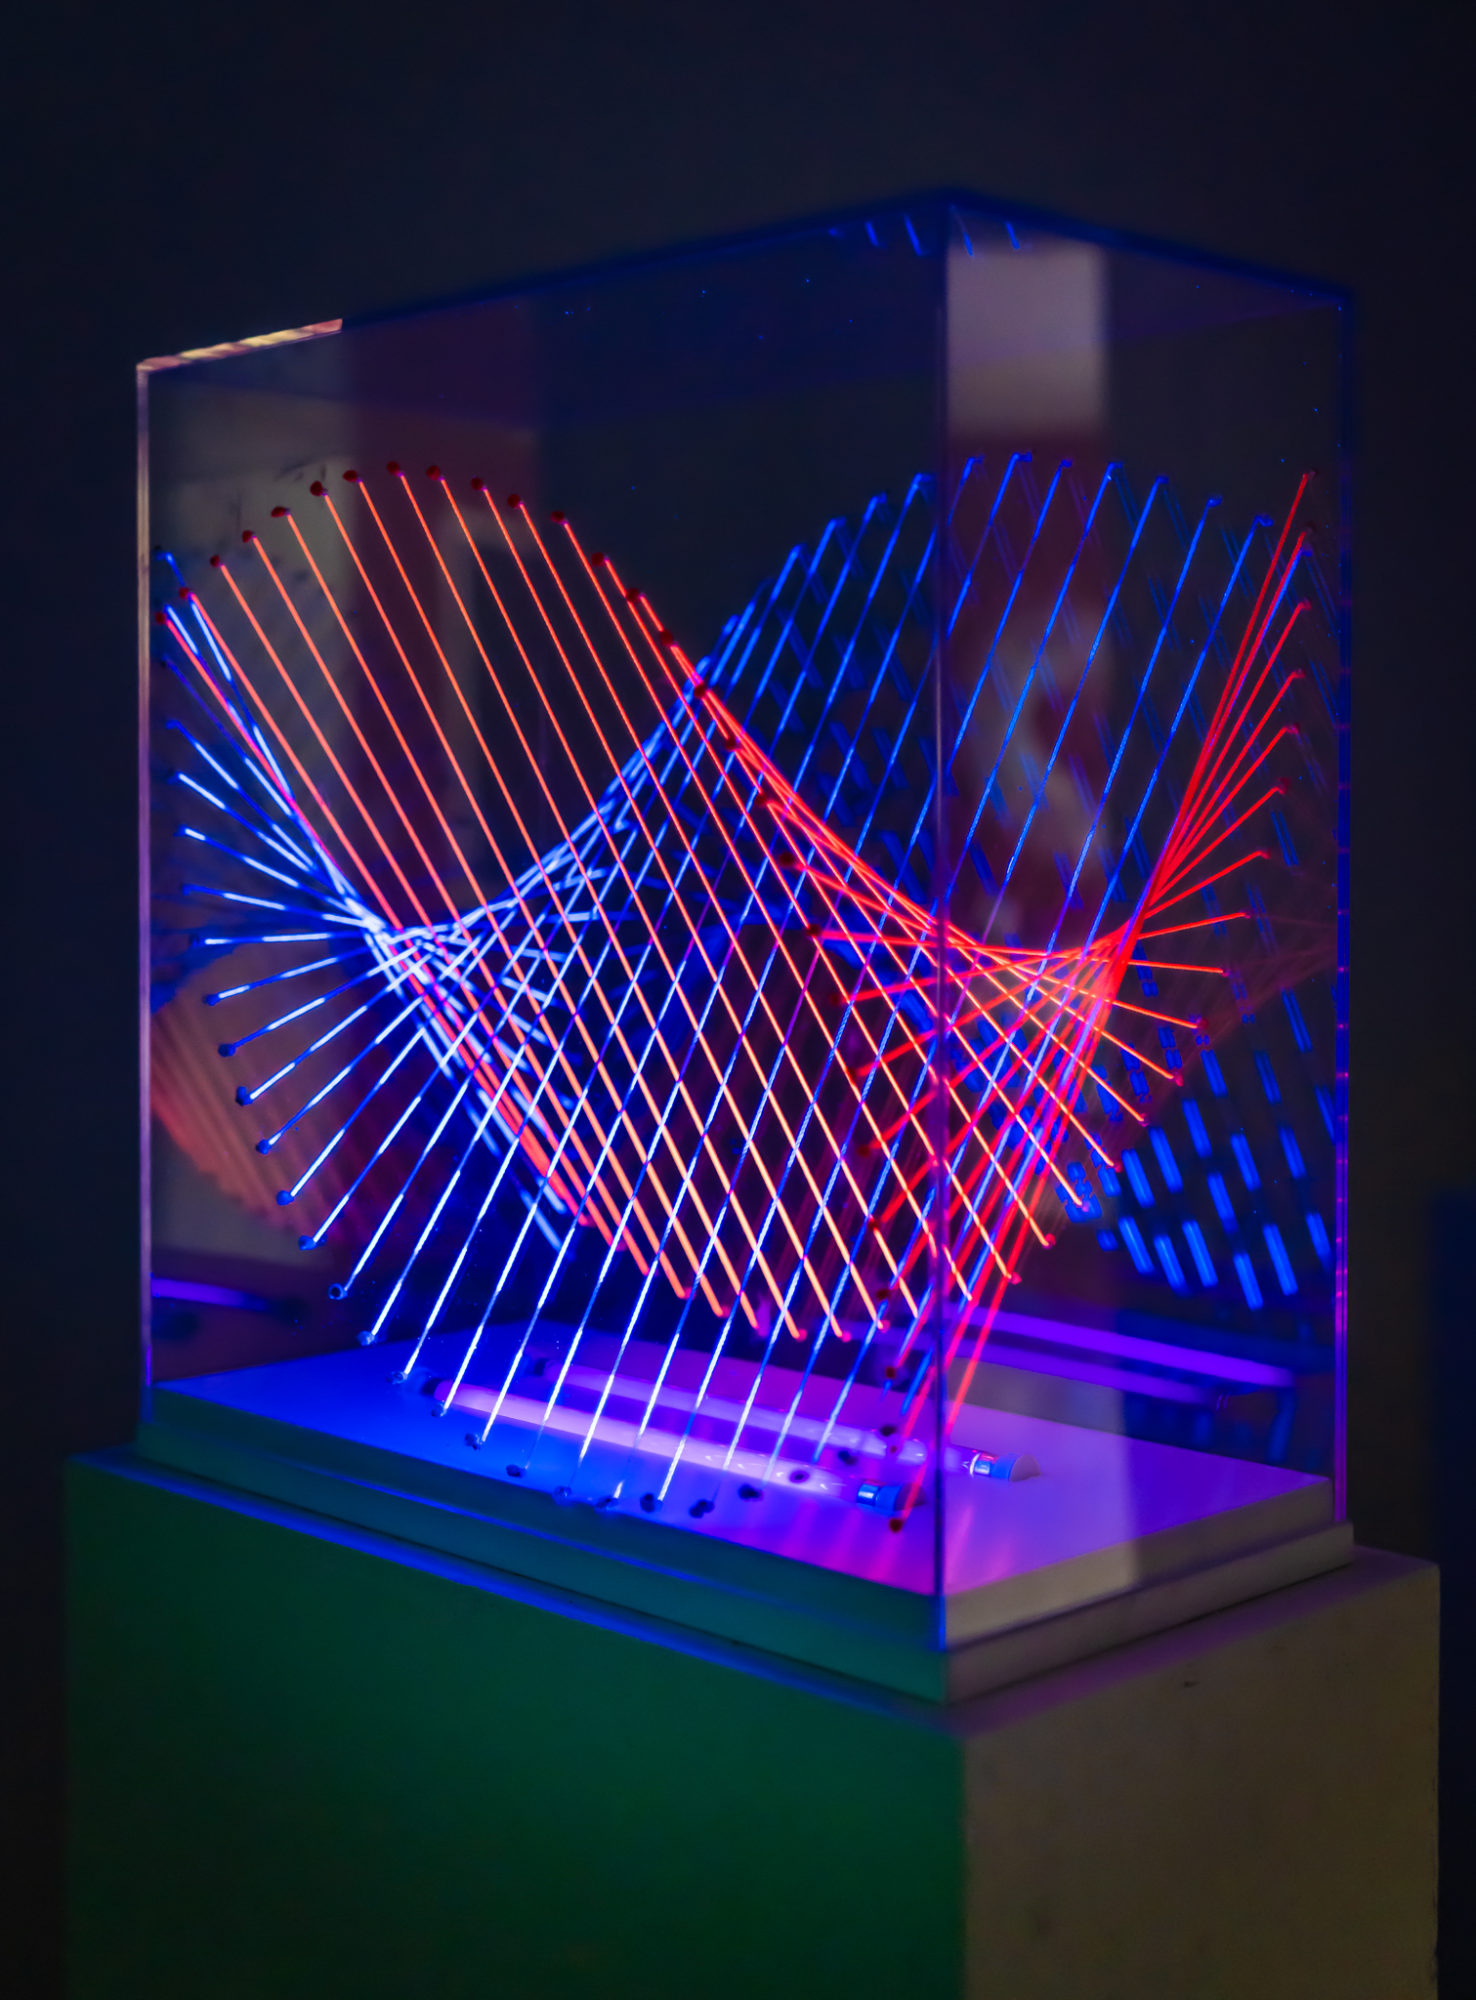 black-lit blue and red string enclosed in glass case